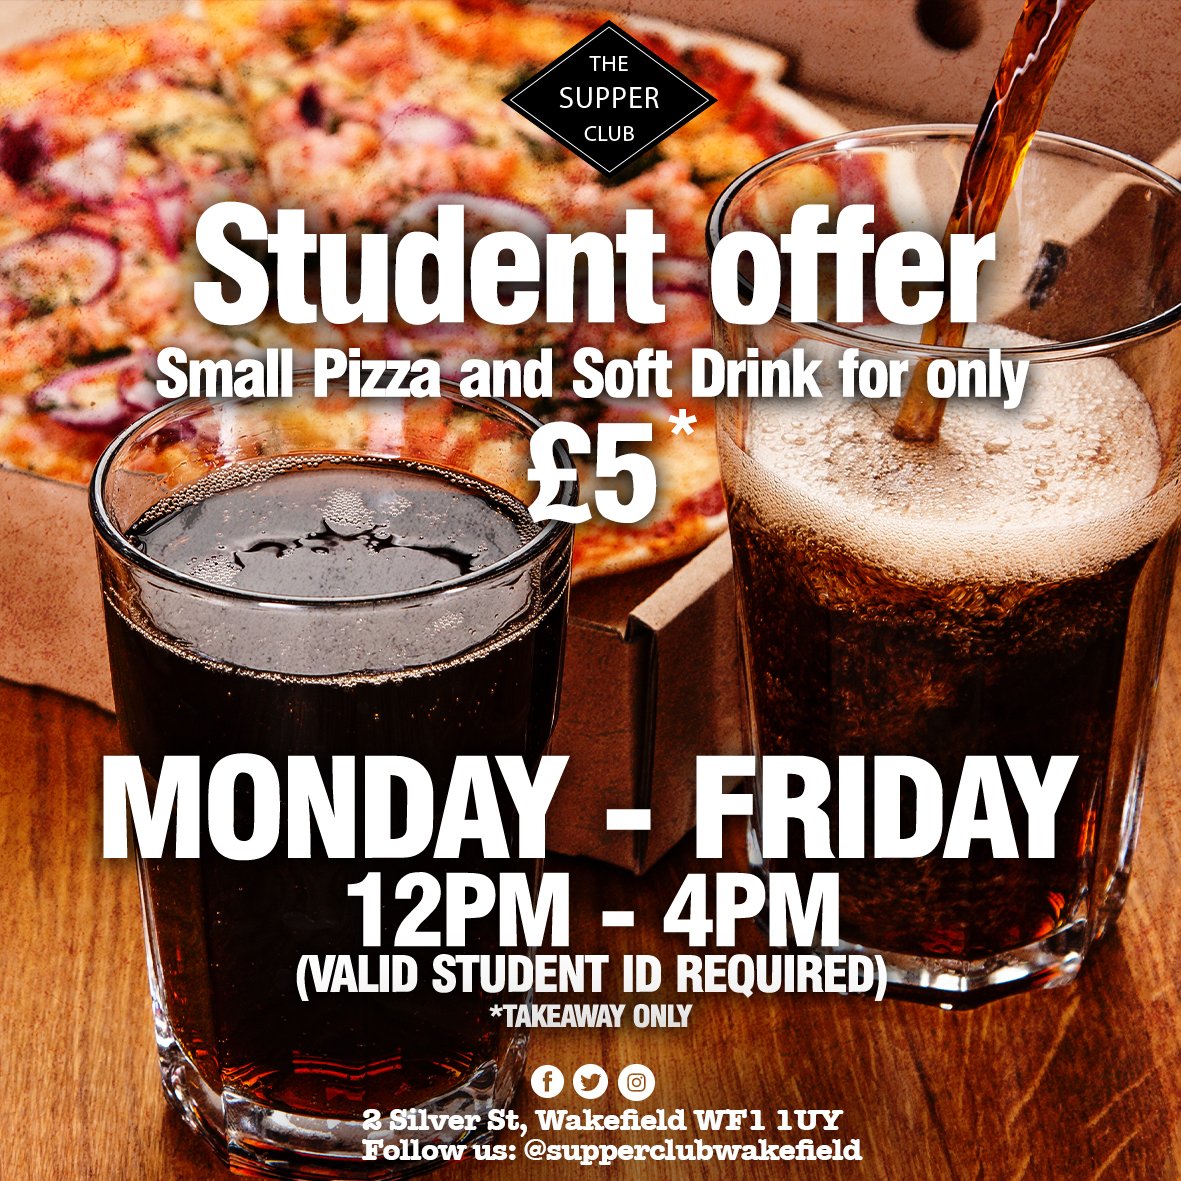 STUDENT OFFER‼ 🤩 Small Pizza and Soft Drink for only £5* 🍕🥤 ✨MONDAY - FRIDAY ✨ 🌟12PM -4PM🌟 (VALI